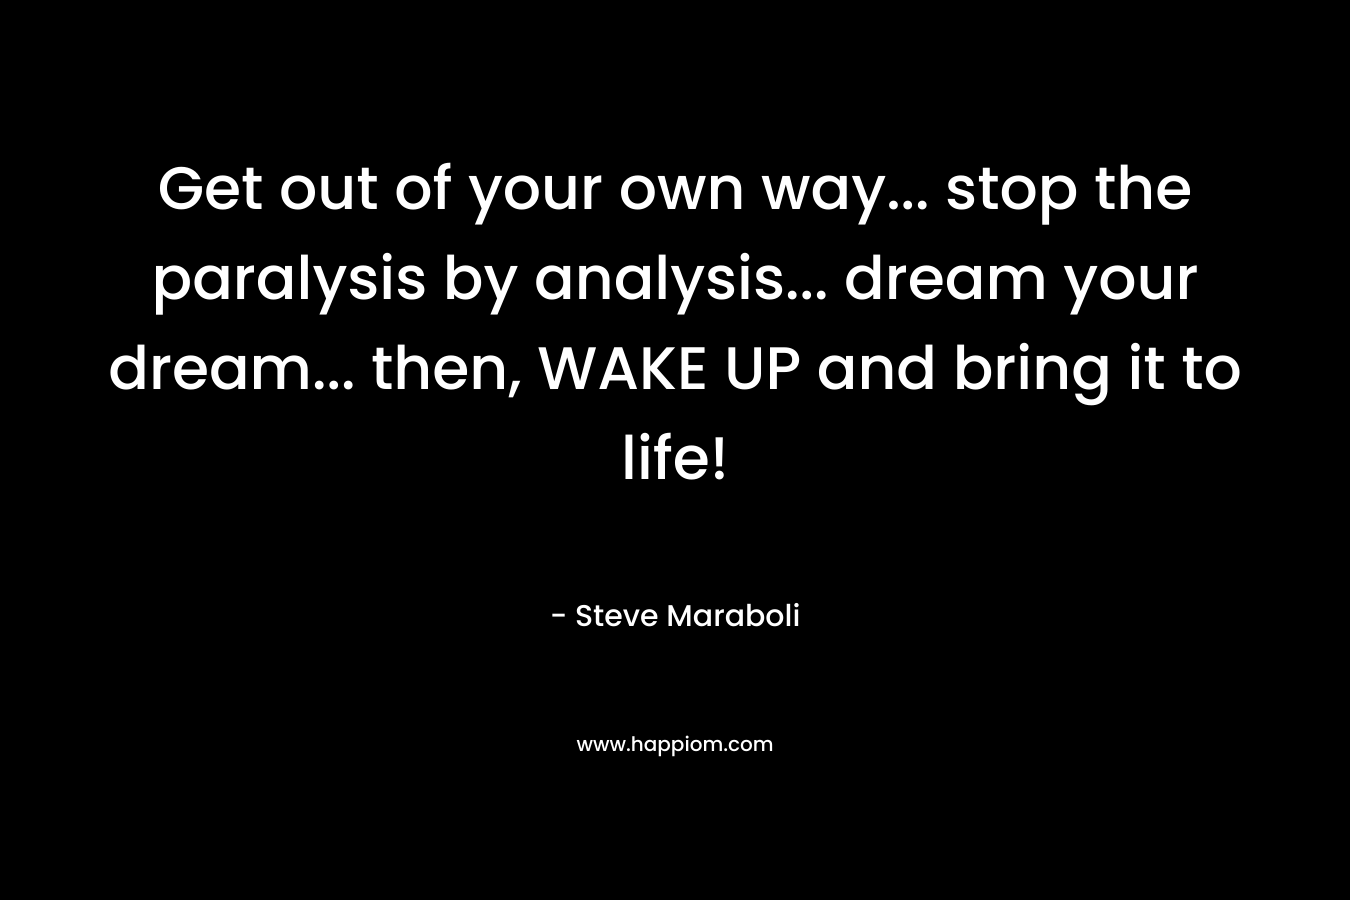 Get out of your own way... stop the paralysis by analysis... dream your dream... then, WAKE UP and bring it to life!